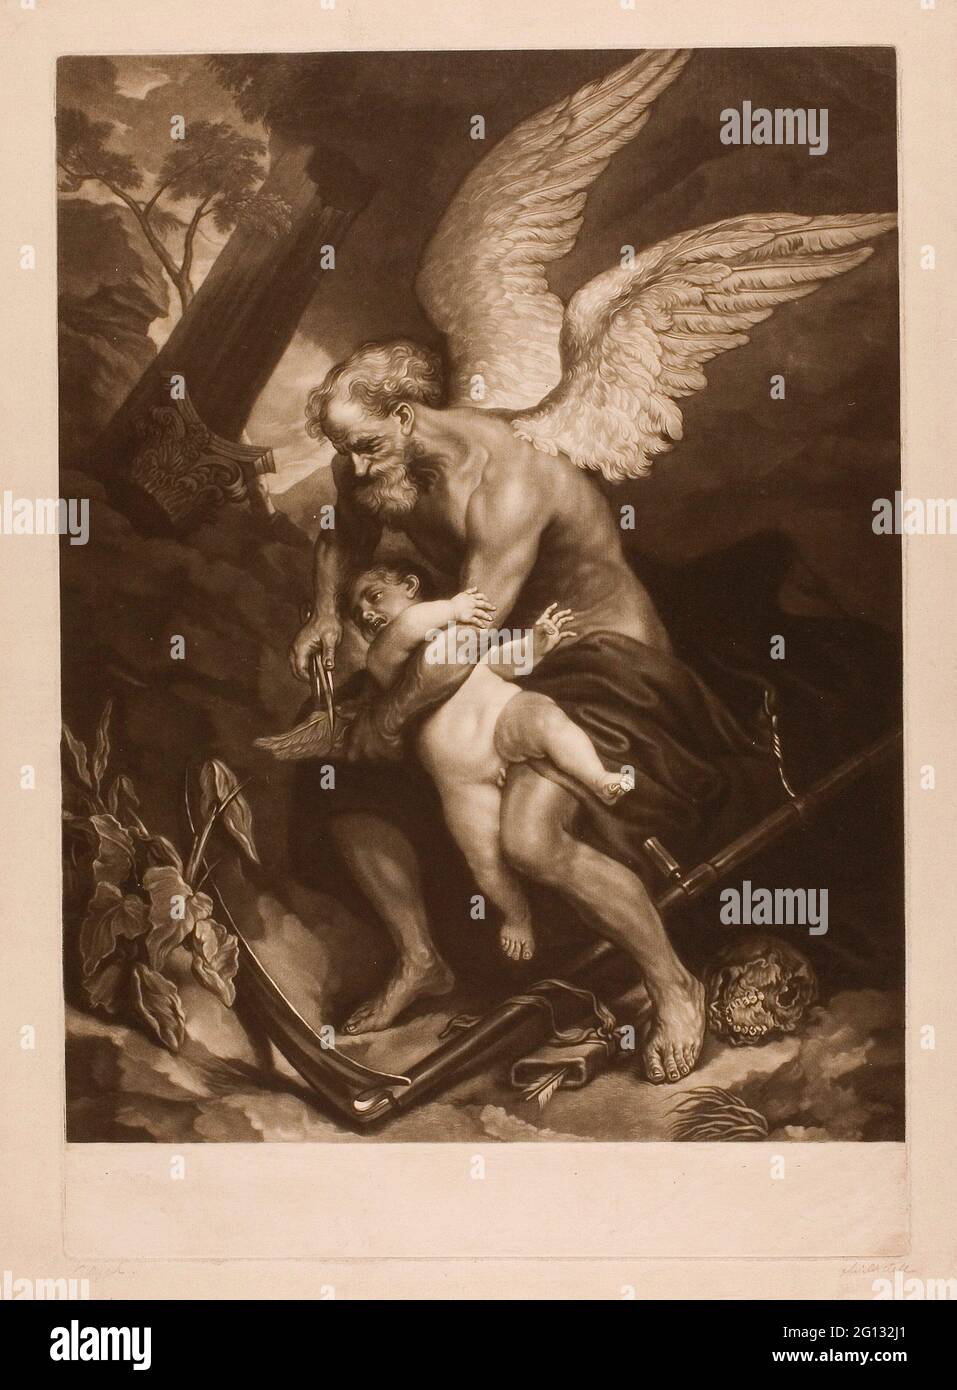 James MacArdell. Time Clipping the Wings of Love - c. 1765 - James McArdell (irlandese, c.. 1728-1765) dopo Anthony Van Dyck (fiammingo, 1599-1641). Foto Stock